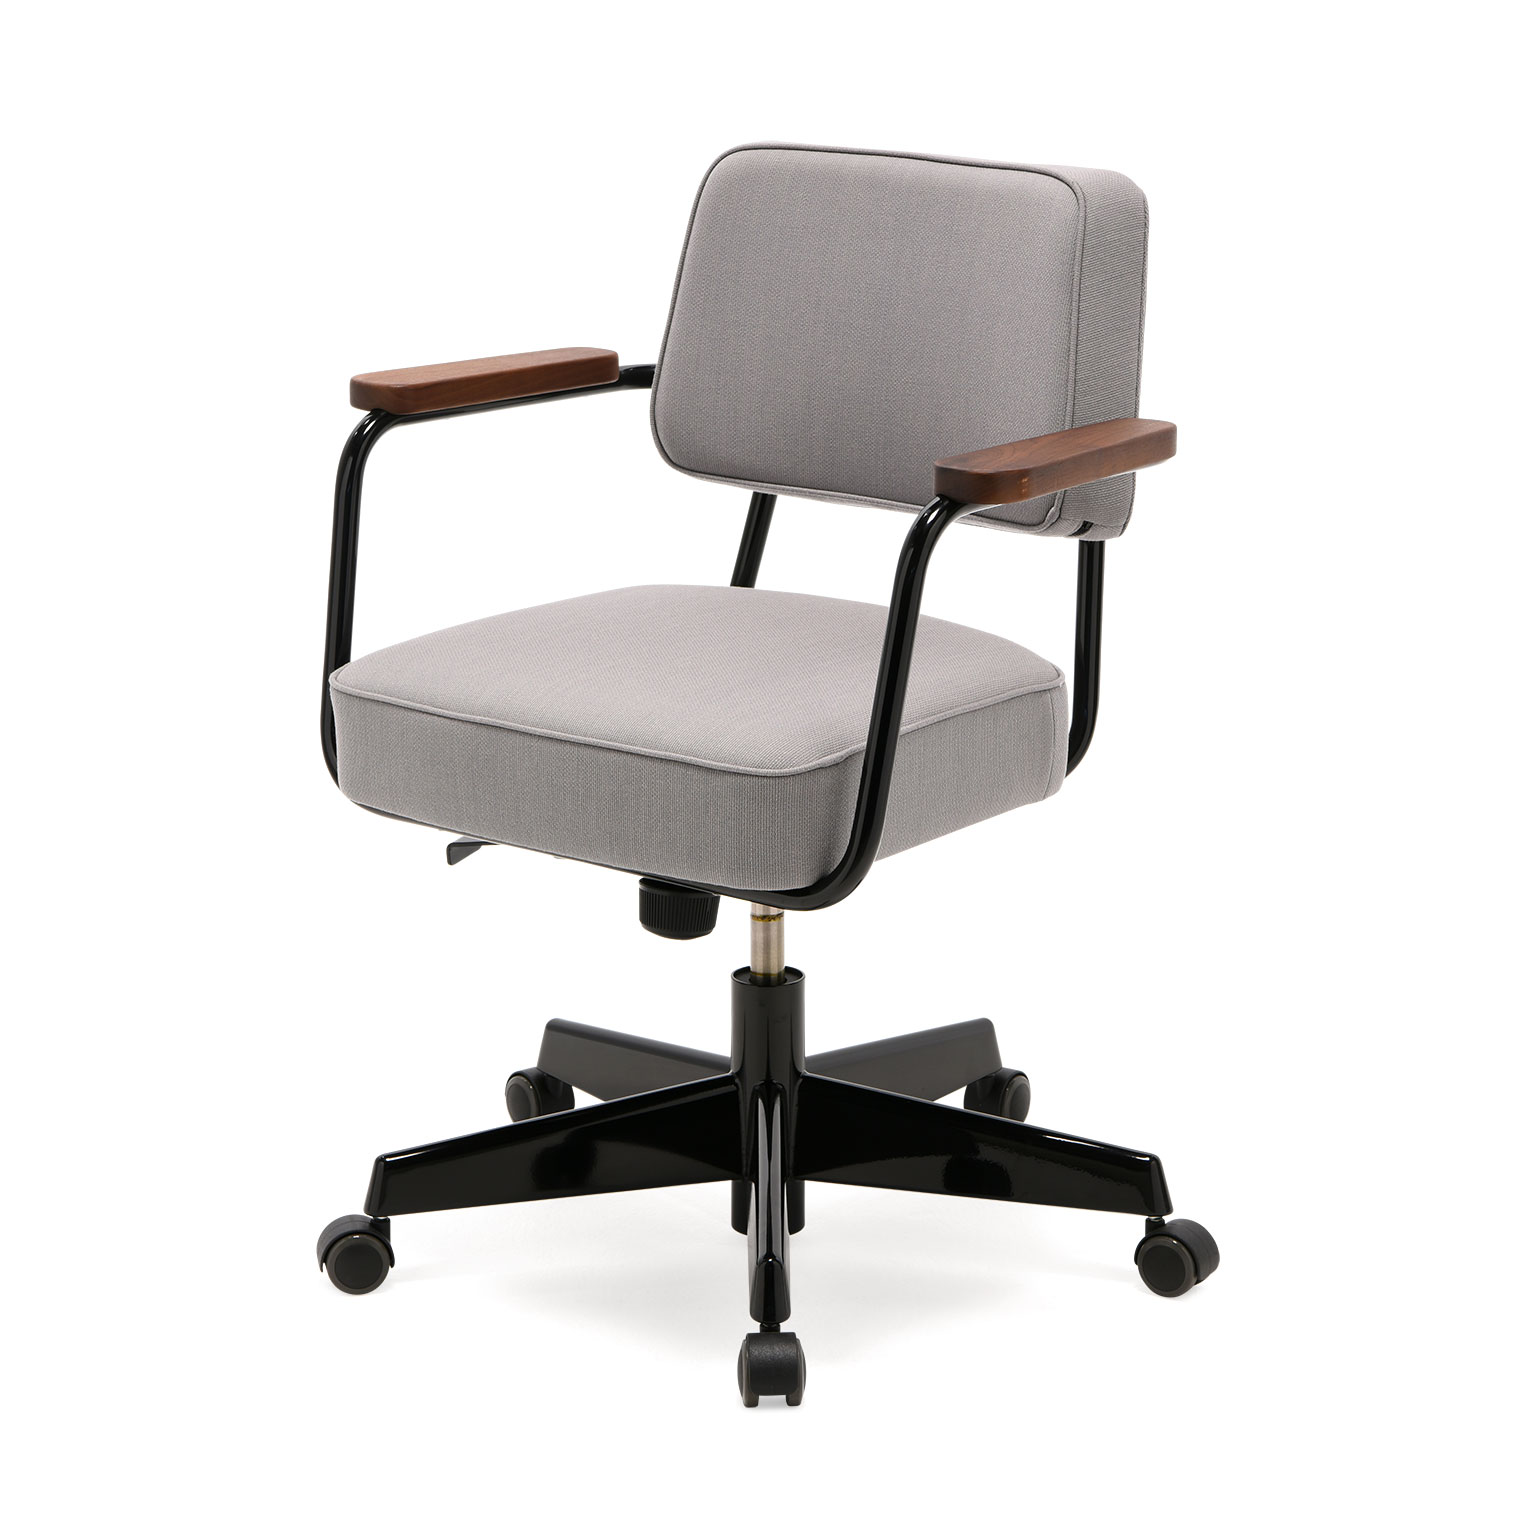 Fauteuil Direction Pivotant チェア [取寄せ商品]